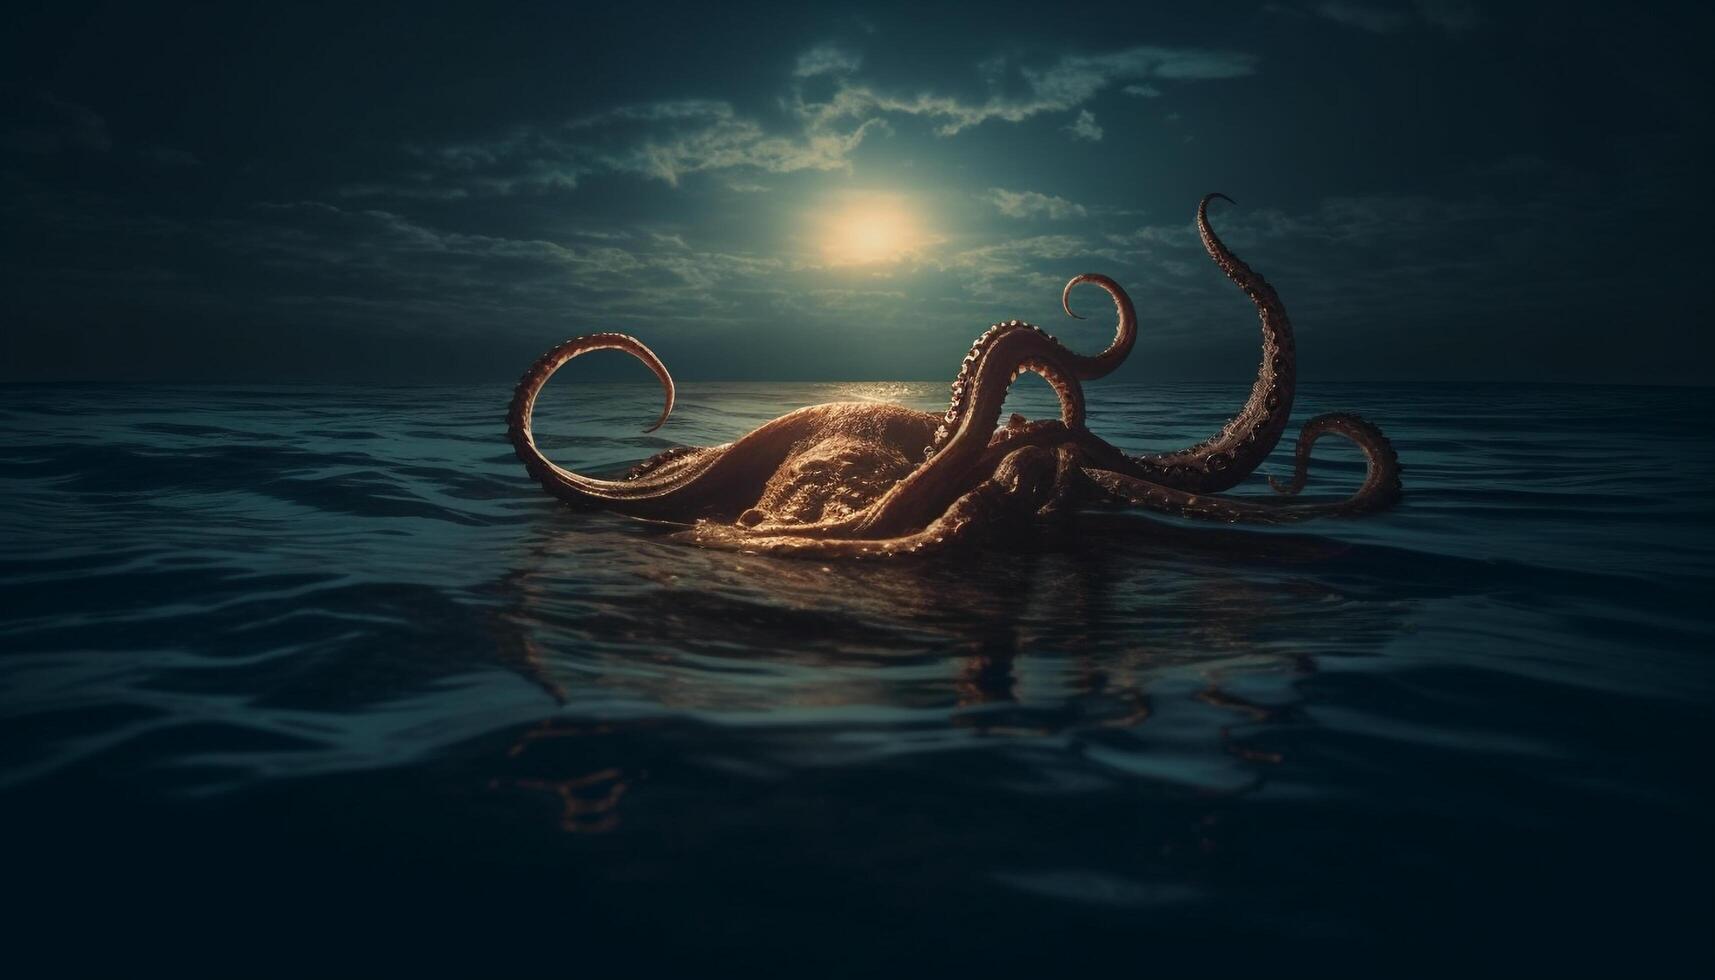 Deep underwater mystery a spooky seascape with dangerous tentacles generated by AI photo